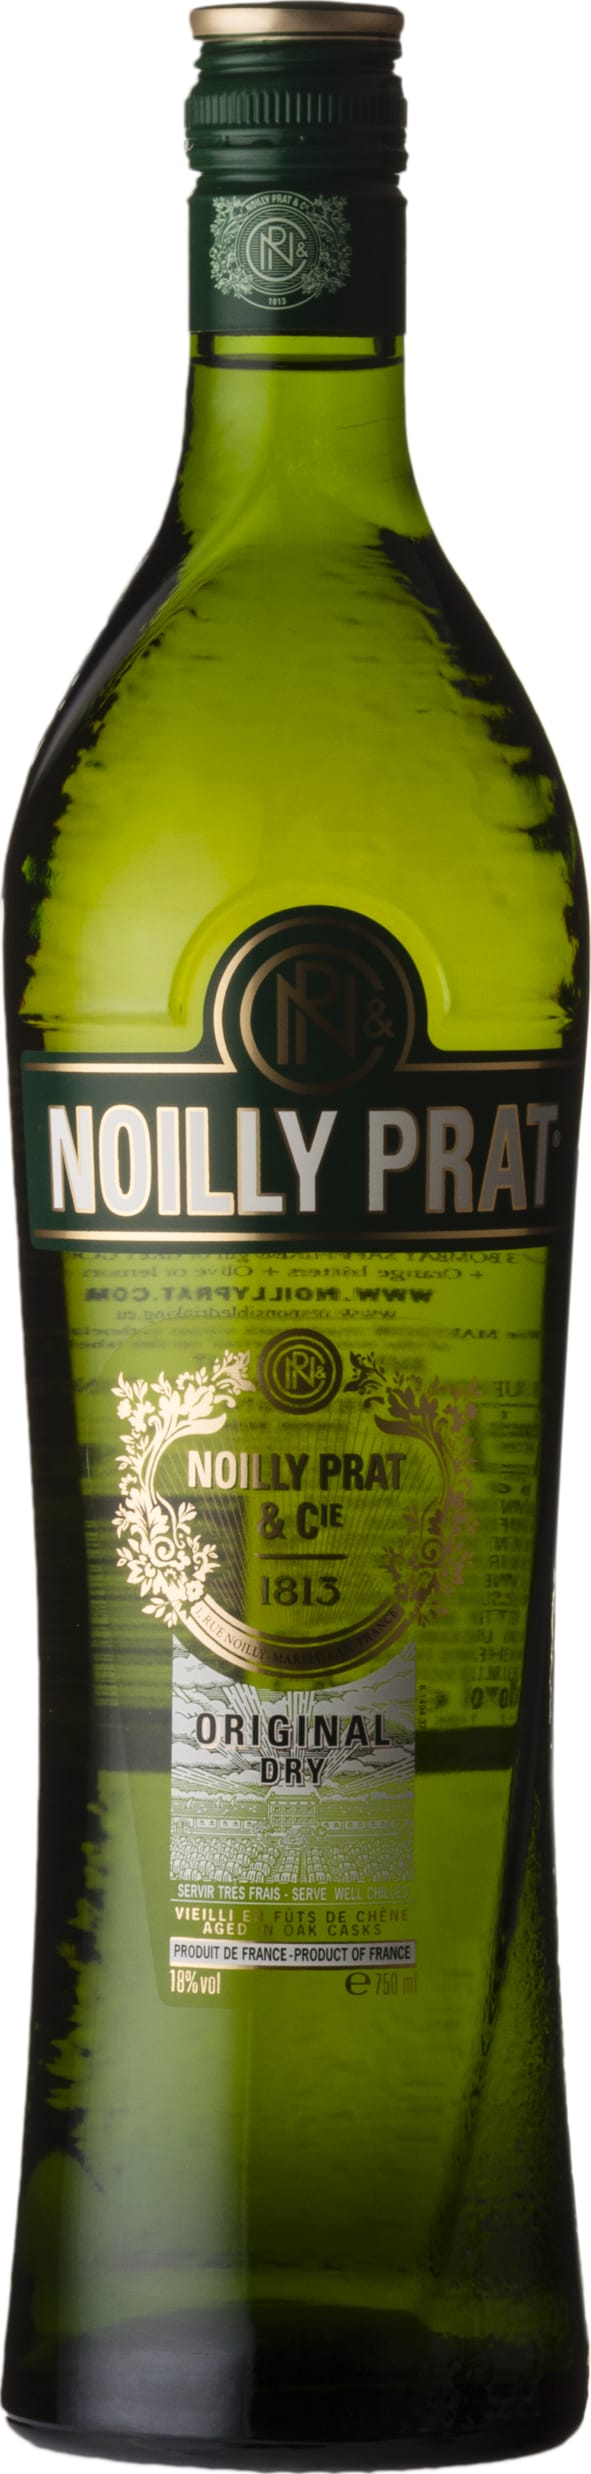 Noilly Prat Vermouth 75cl NV - Buy Noilly Prat Wines from GREAT WINES DIRECT wine shop